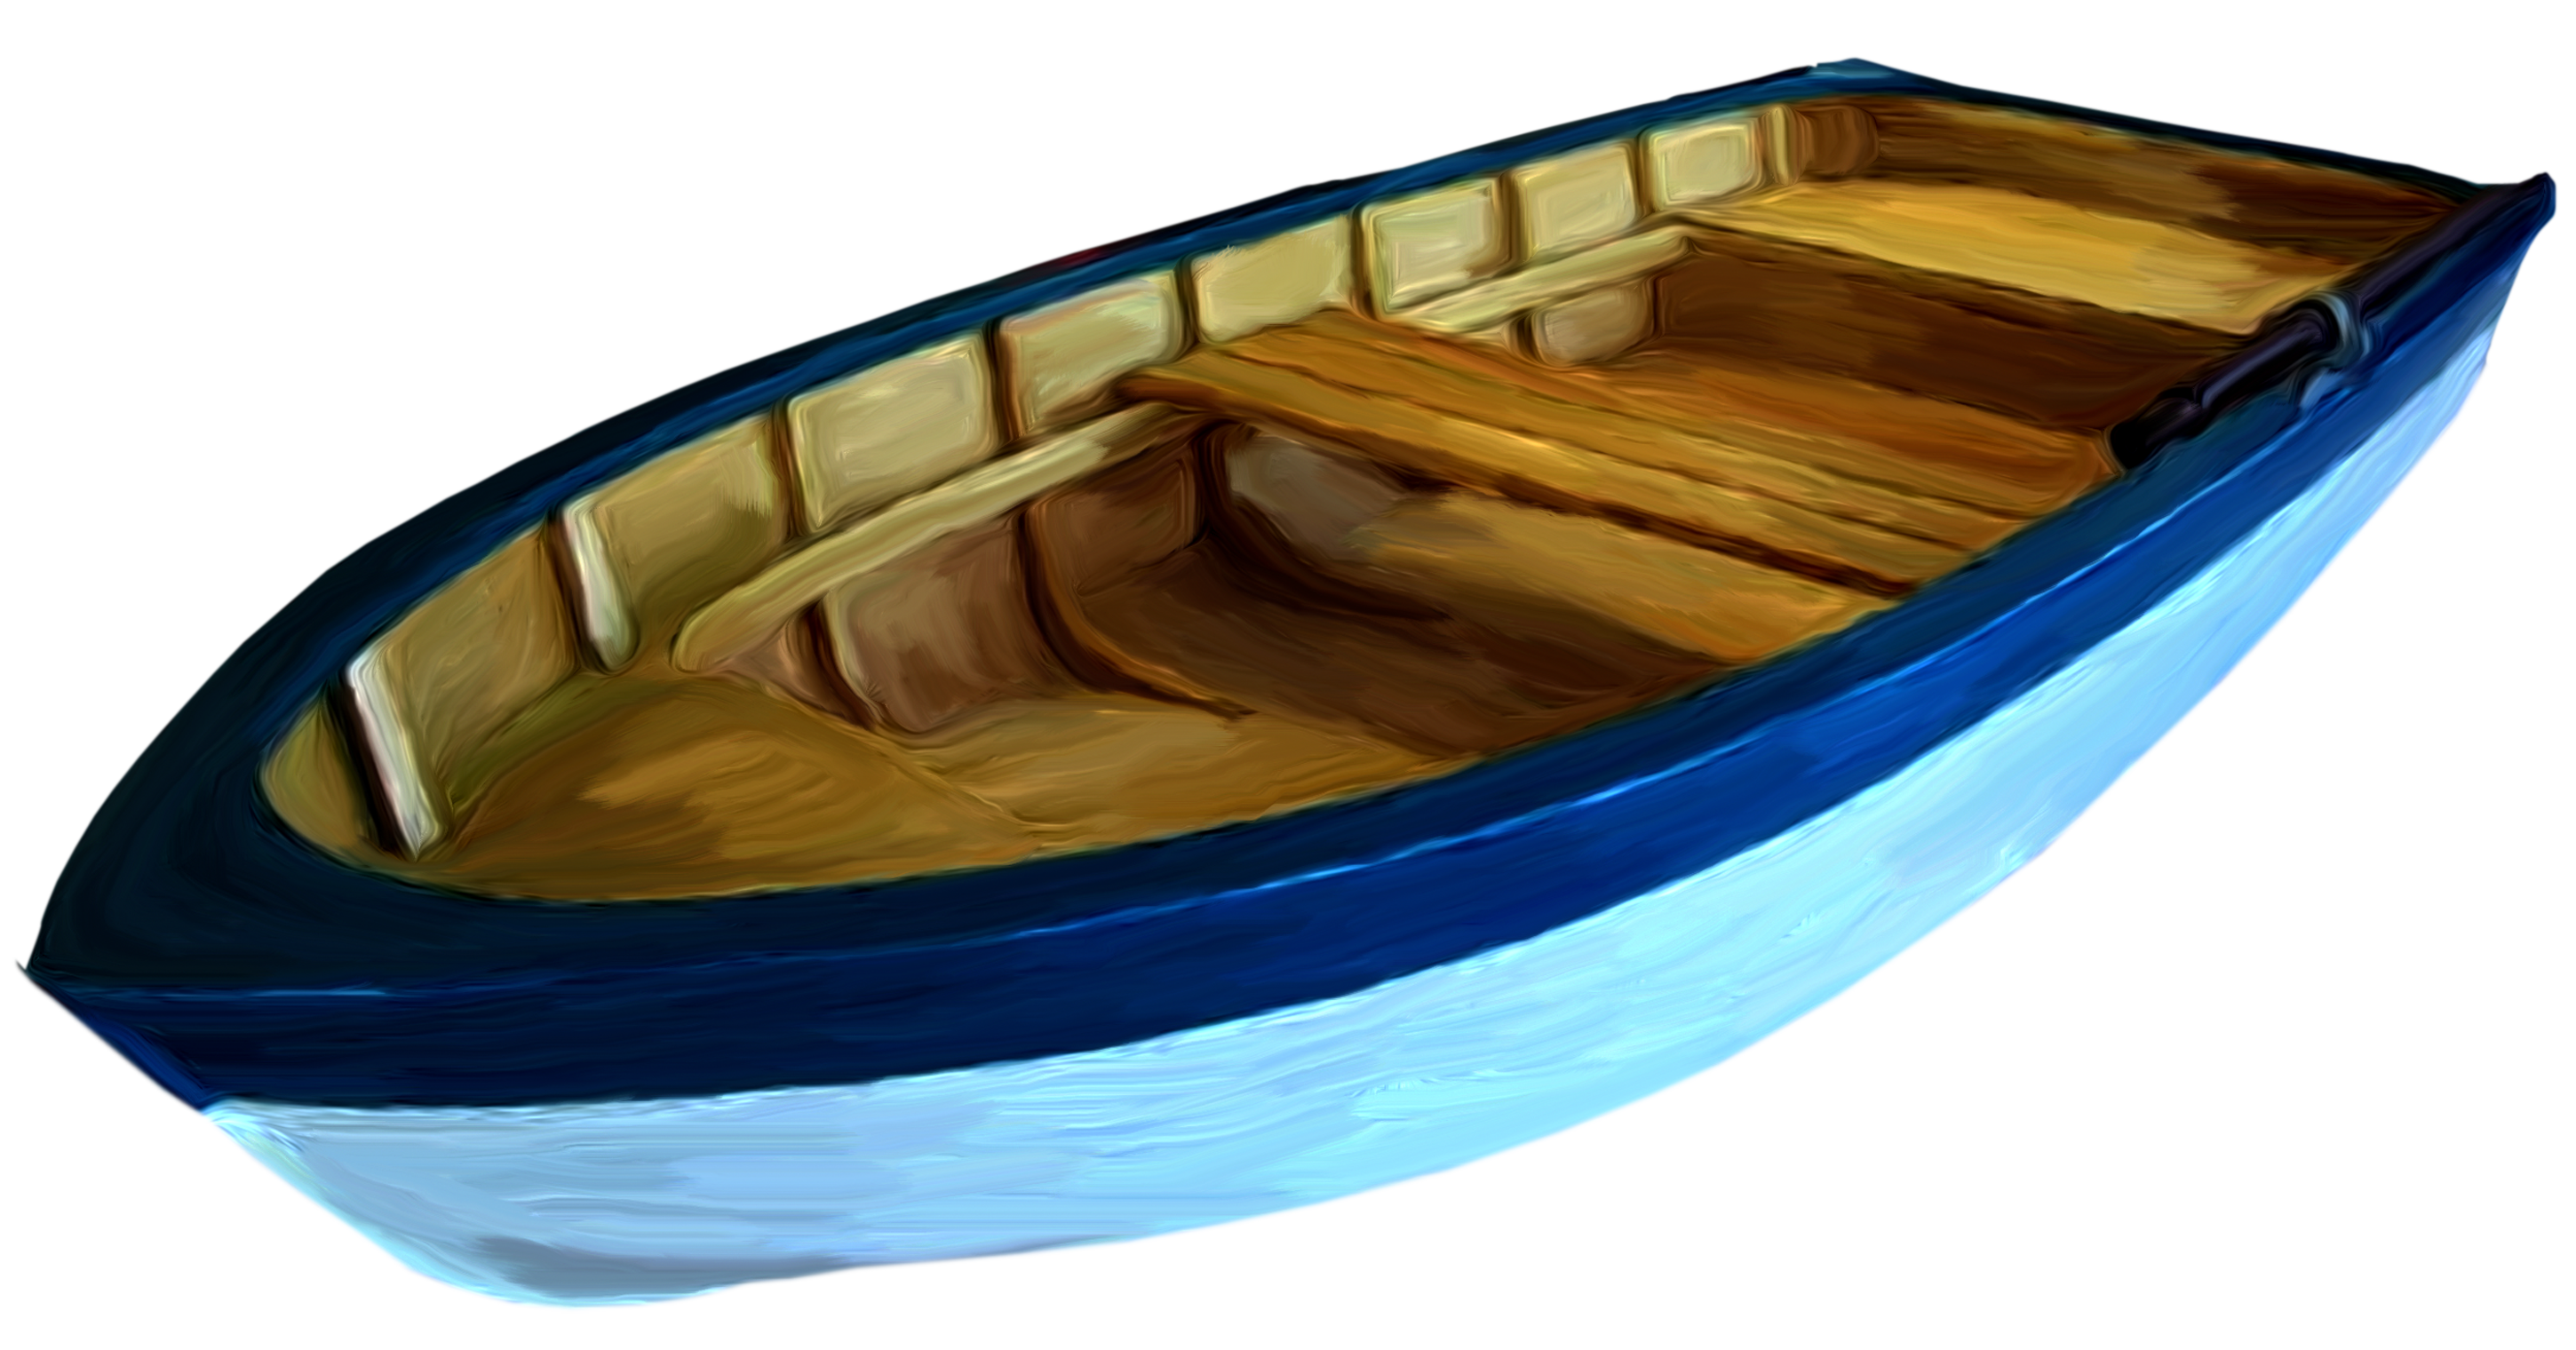 Boat PNG High-Quality Image